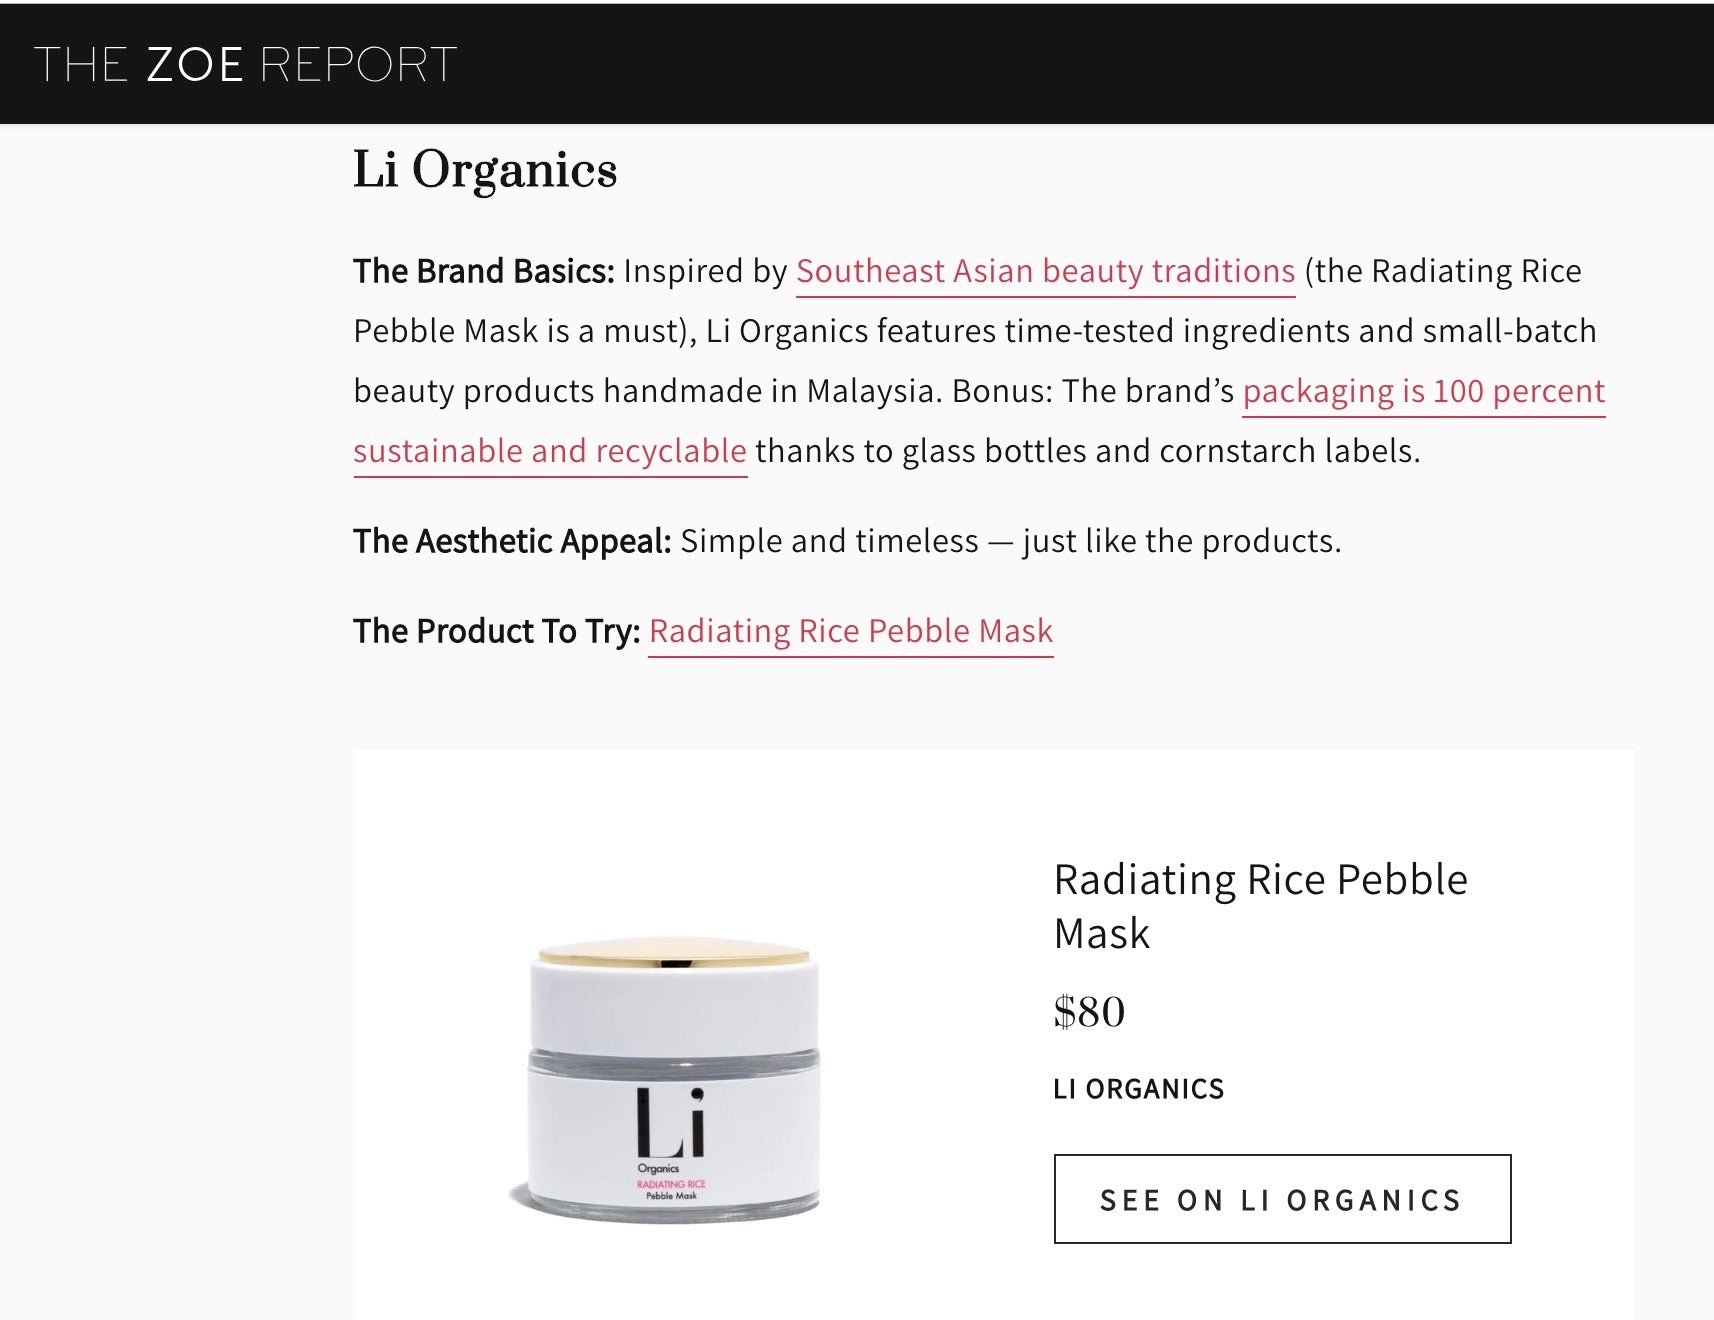 Li Organics on The Zoe Report, 2019's Brands to Look Out For